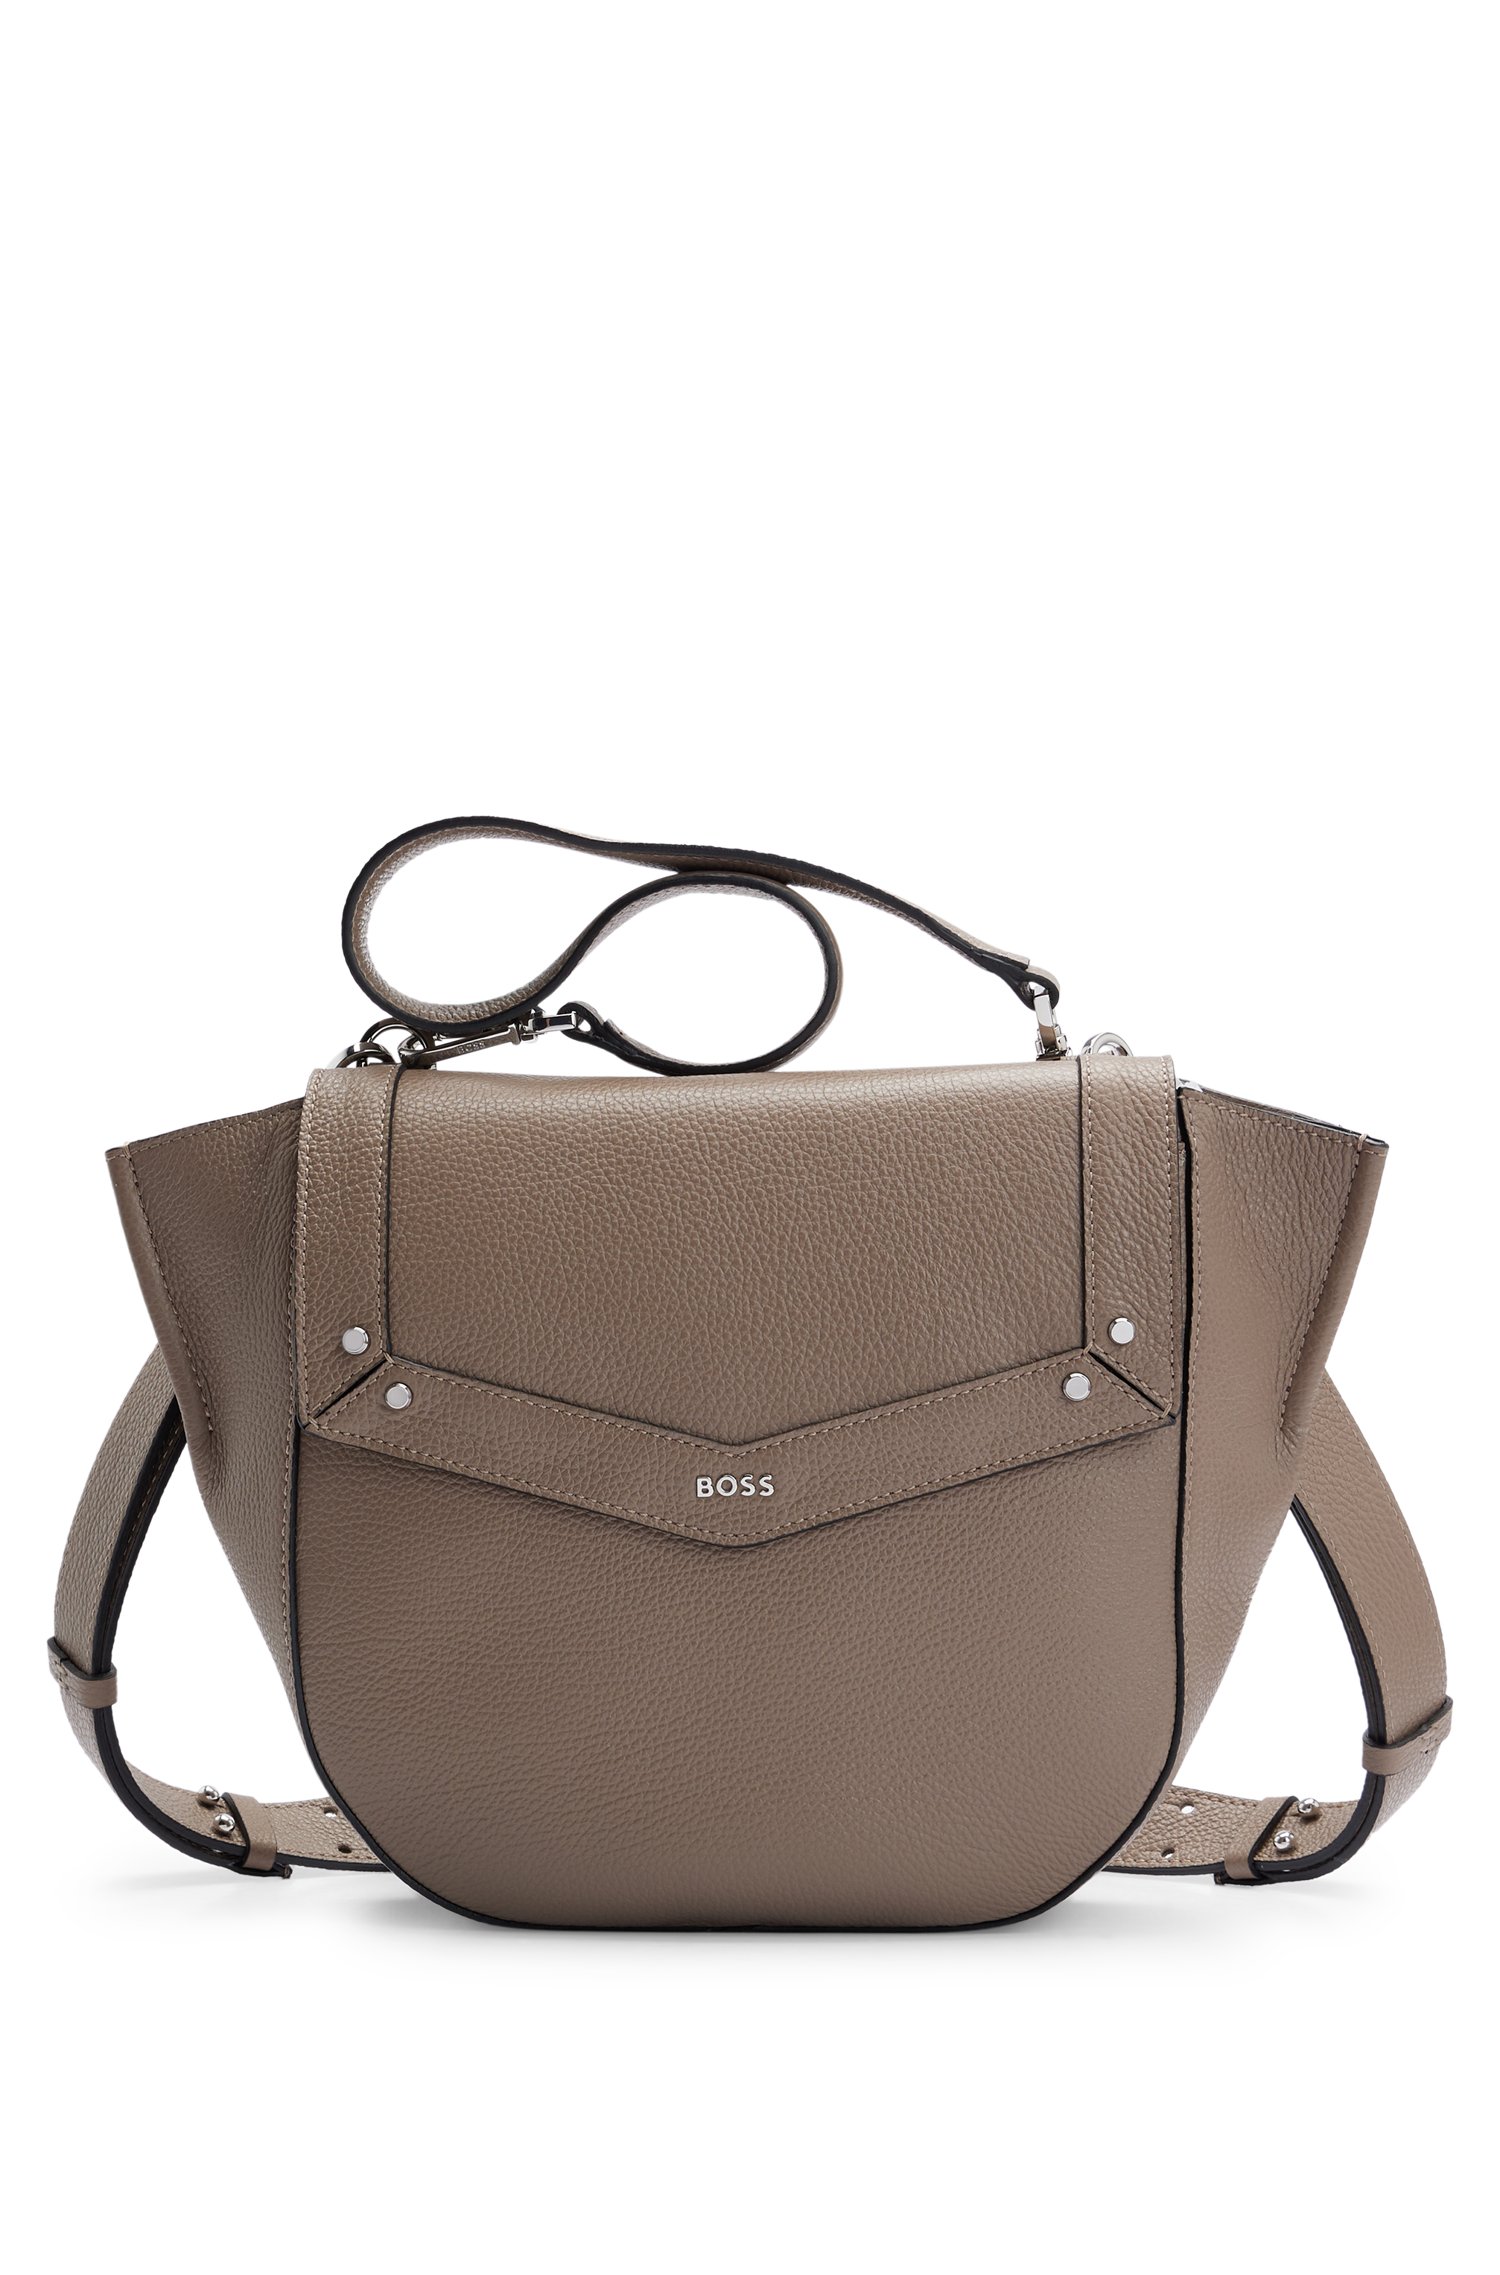 Saddle bag in grained leather with detachable straps